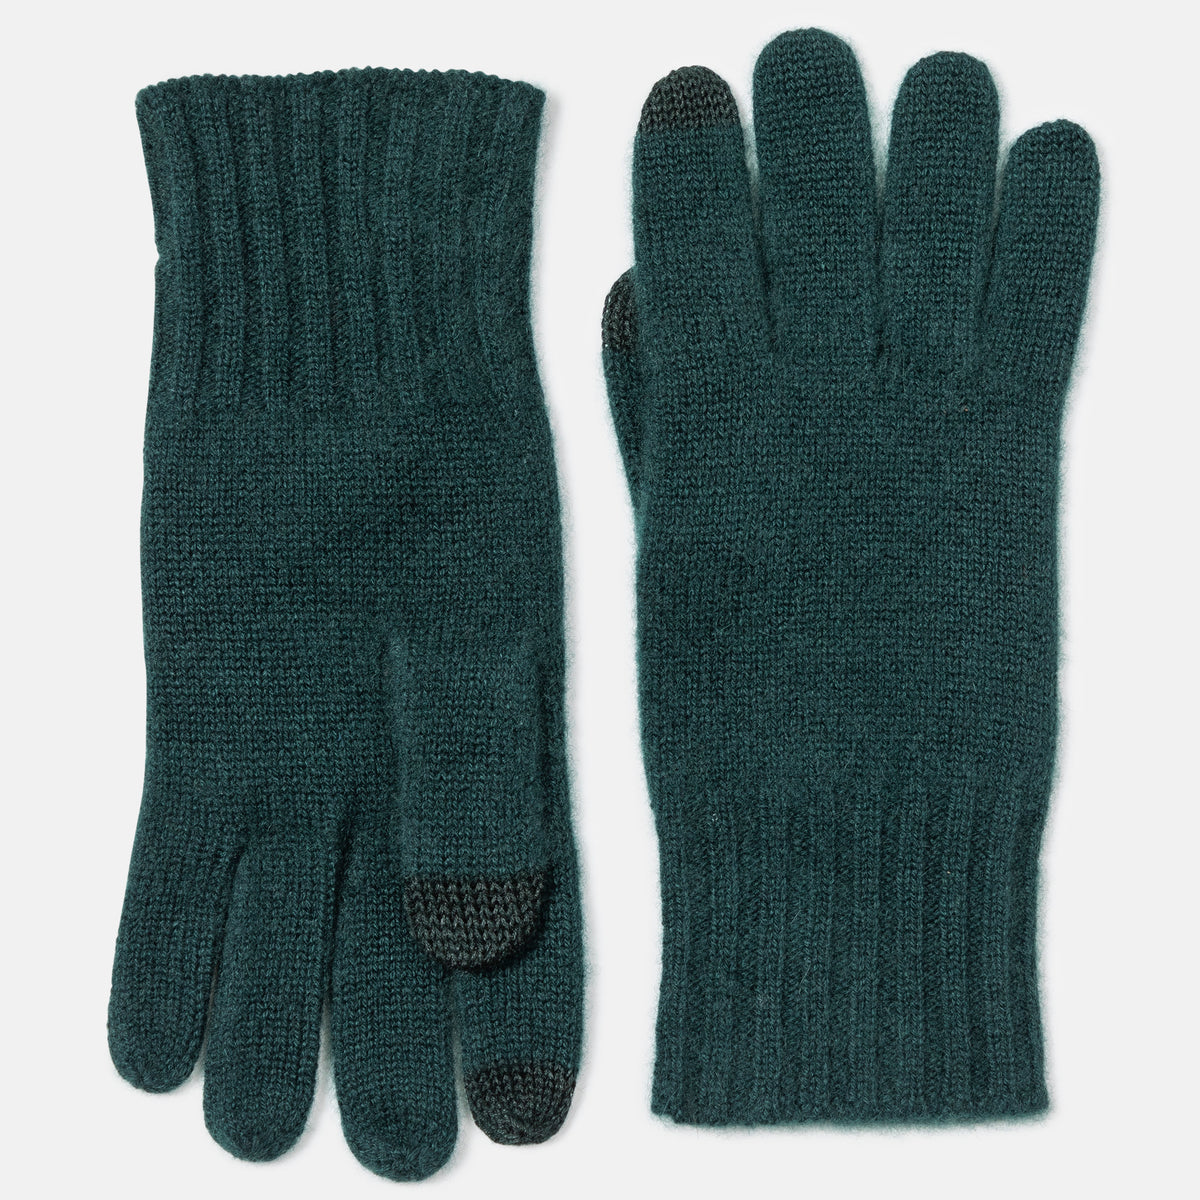 Picture of knit cashmere gloves with touch tech finger tips and rib cuff, dark green.